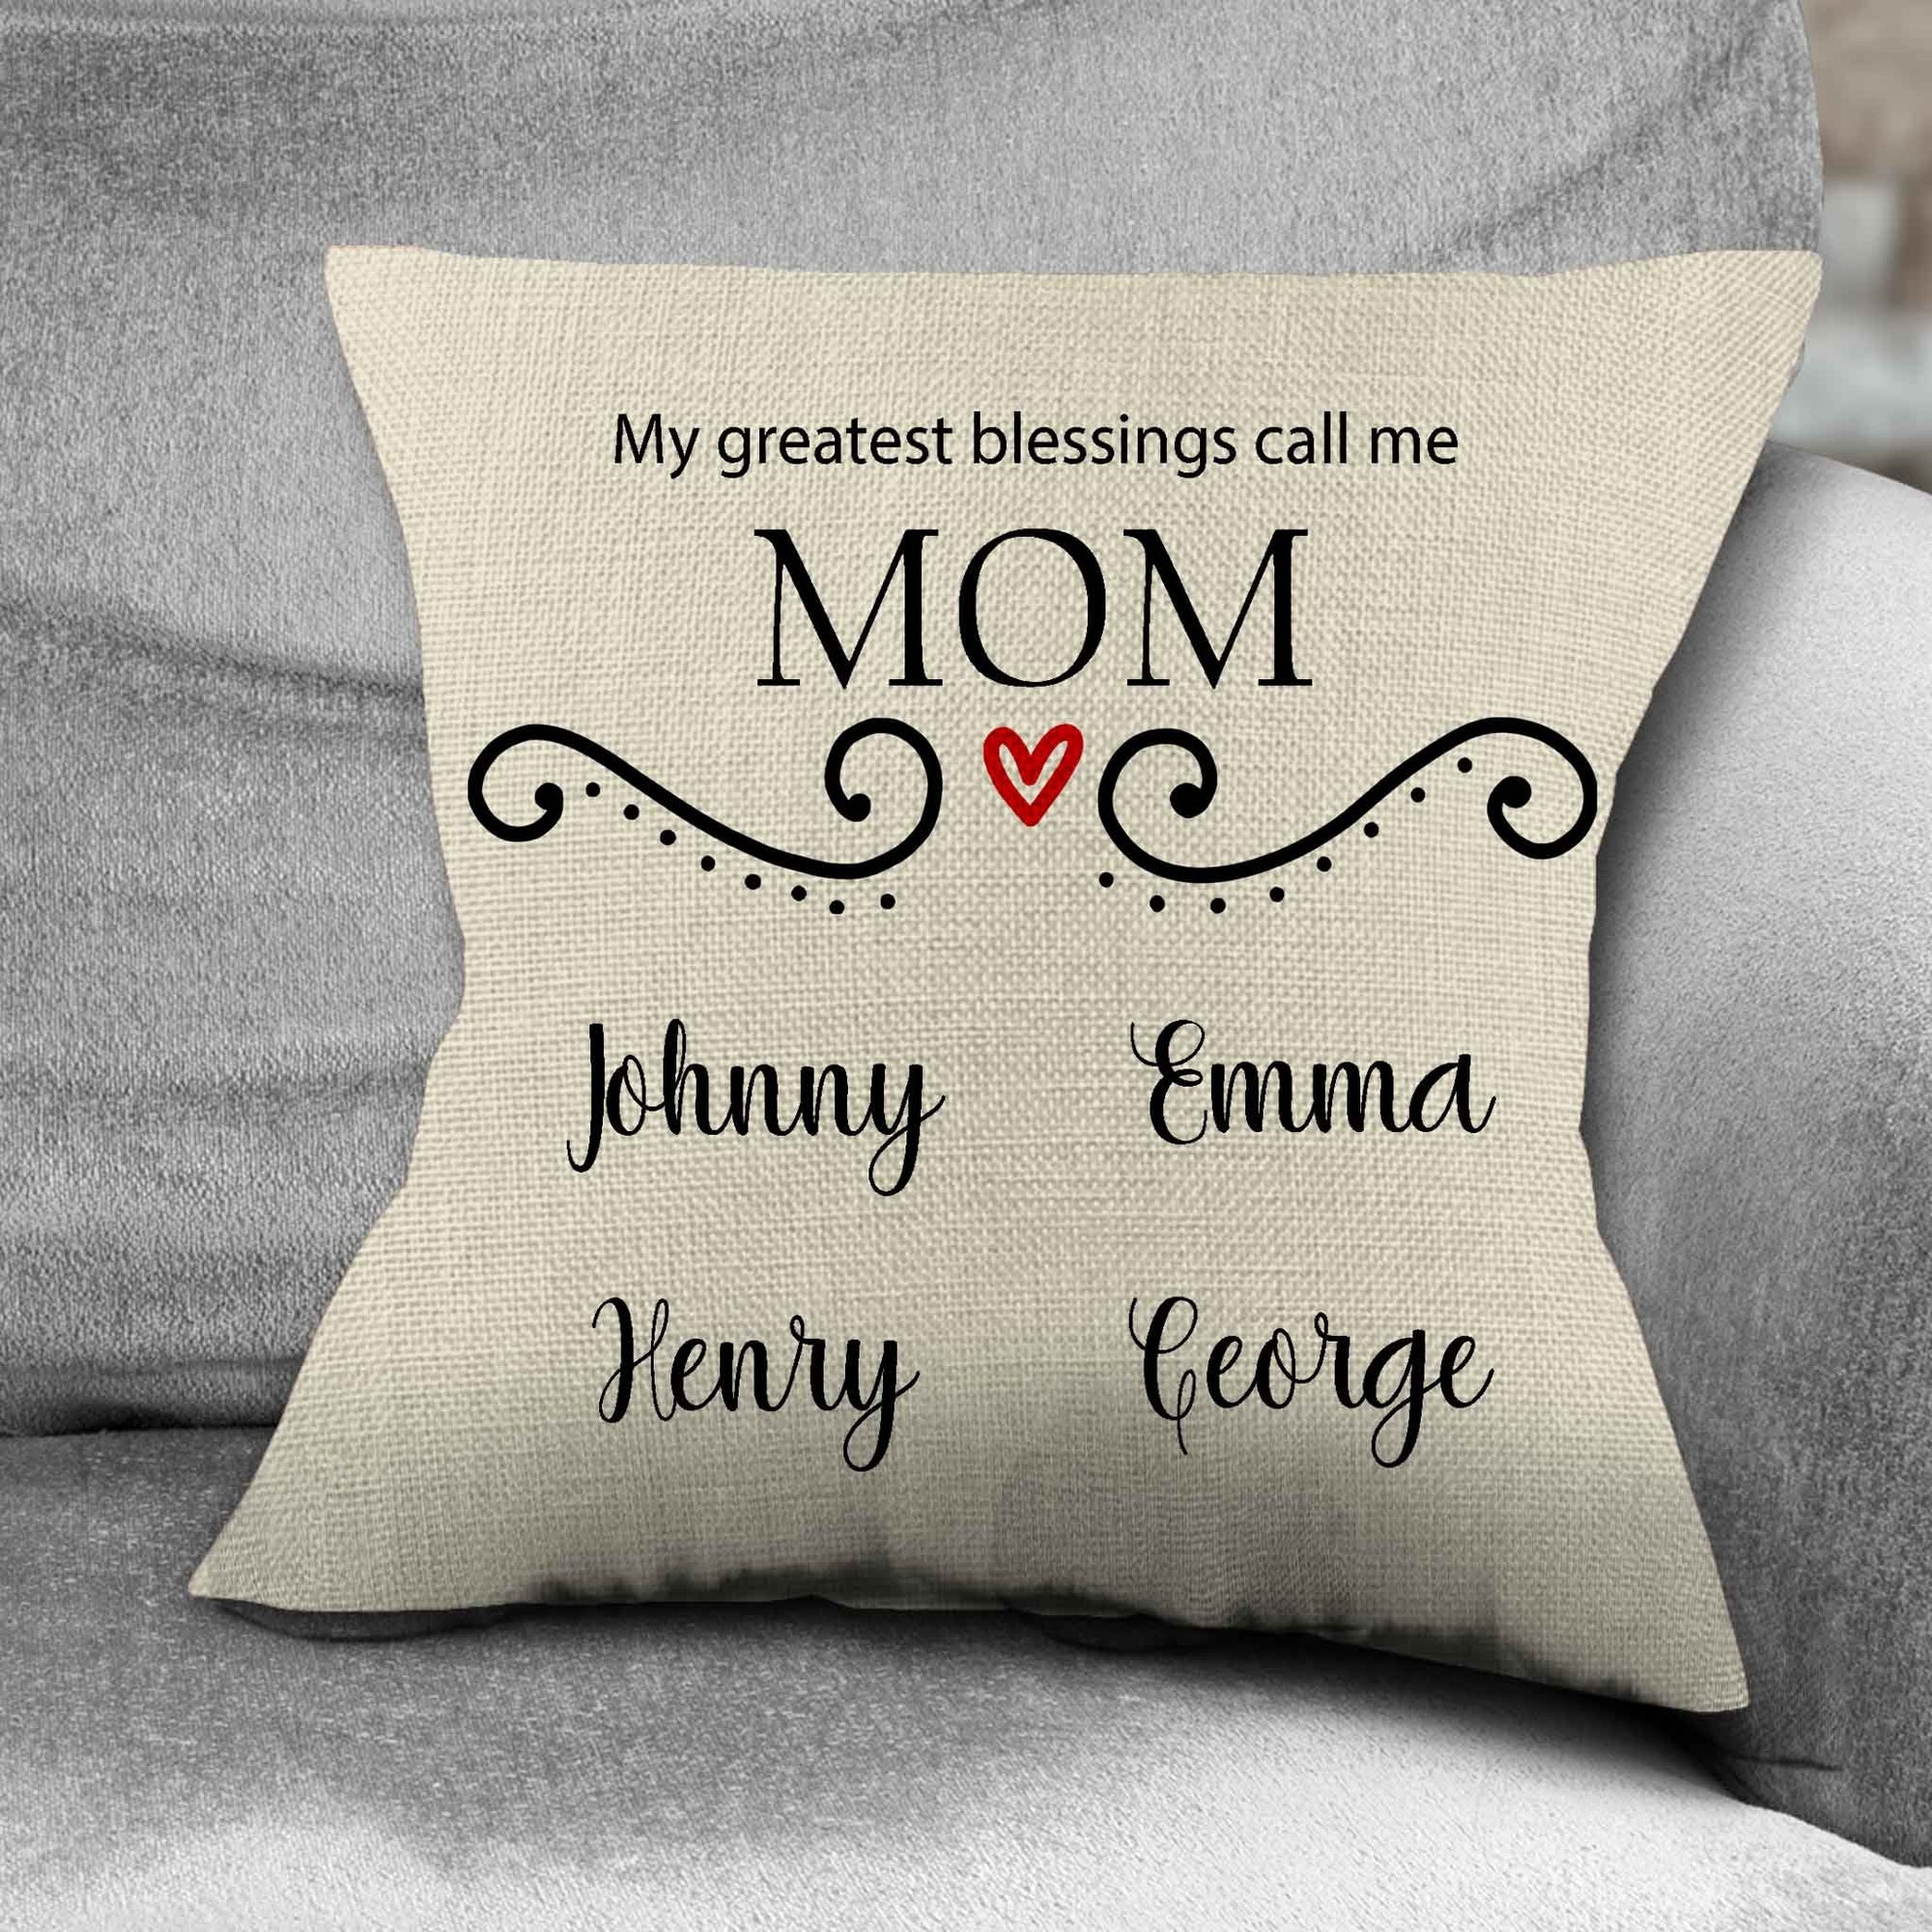 Personalized Throw Pillow | Custom Decorative Pillow | Mom's Greatest Blessing